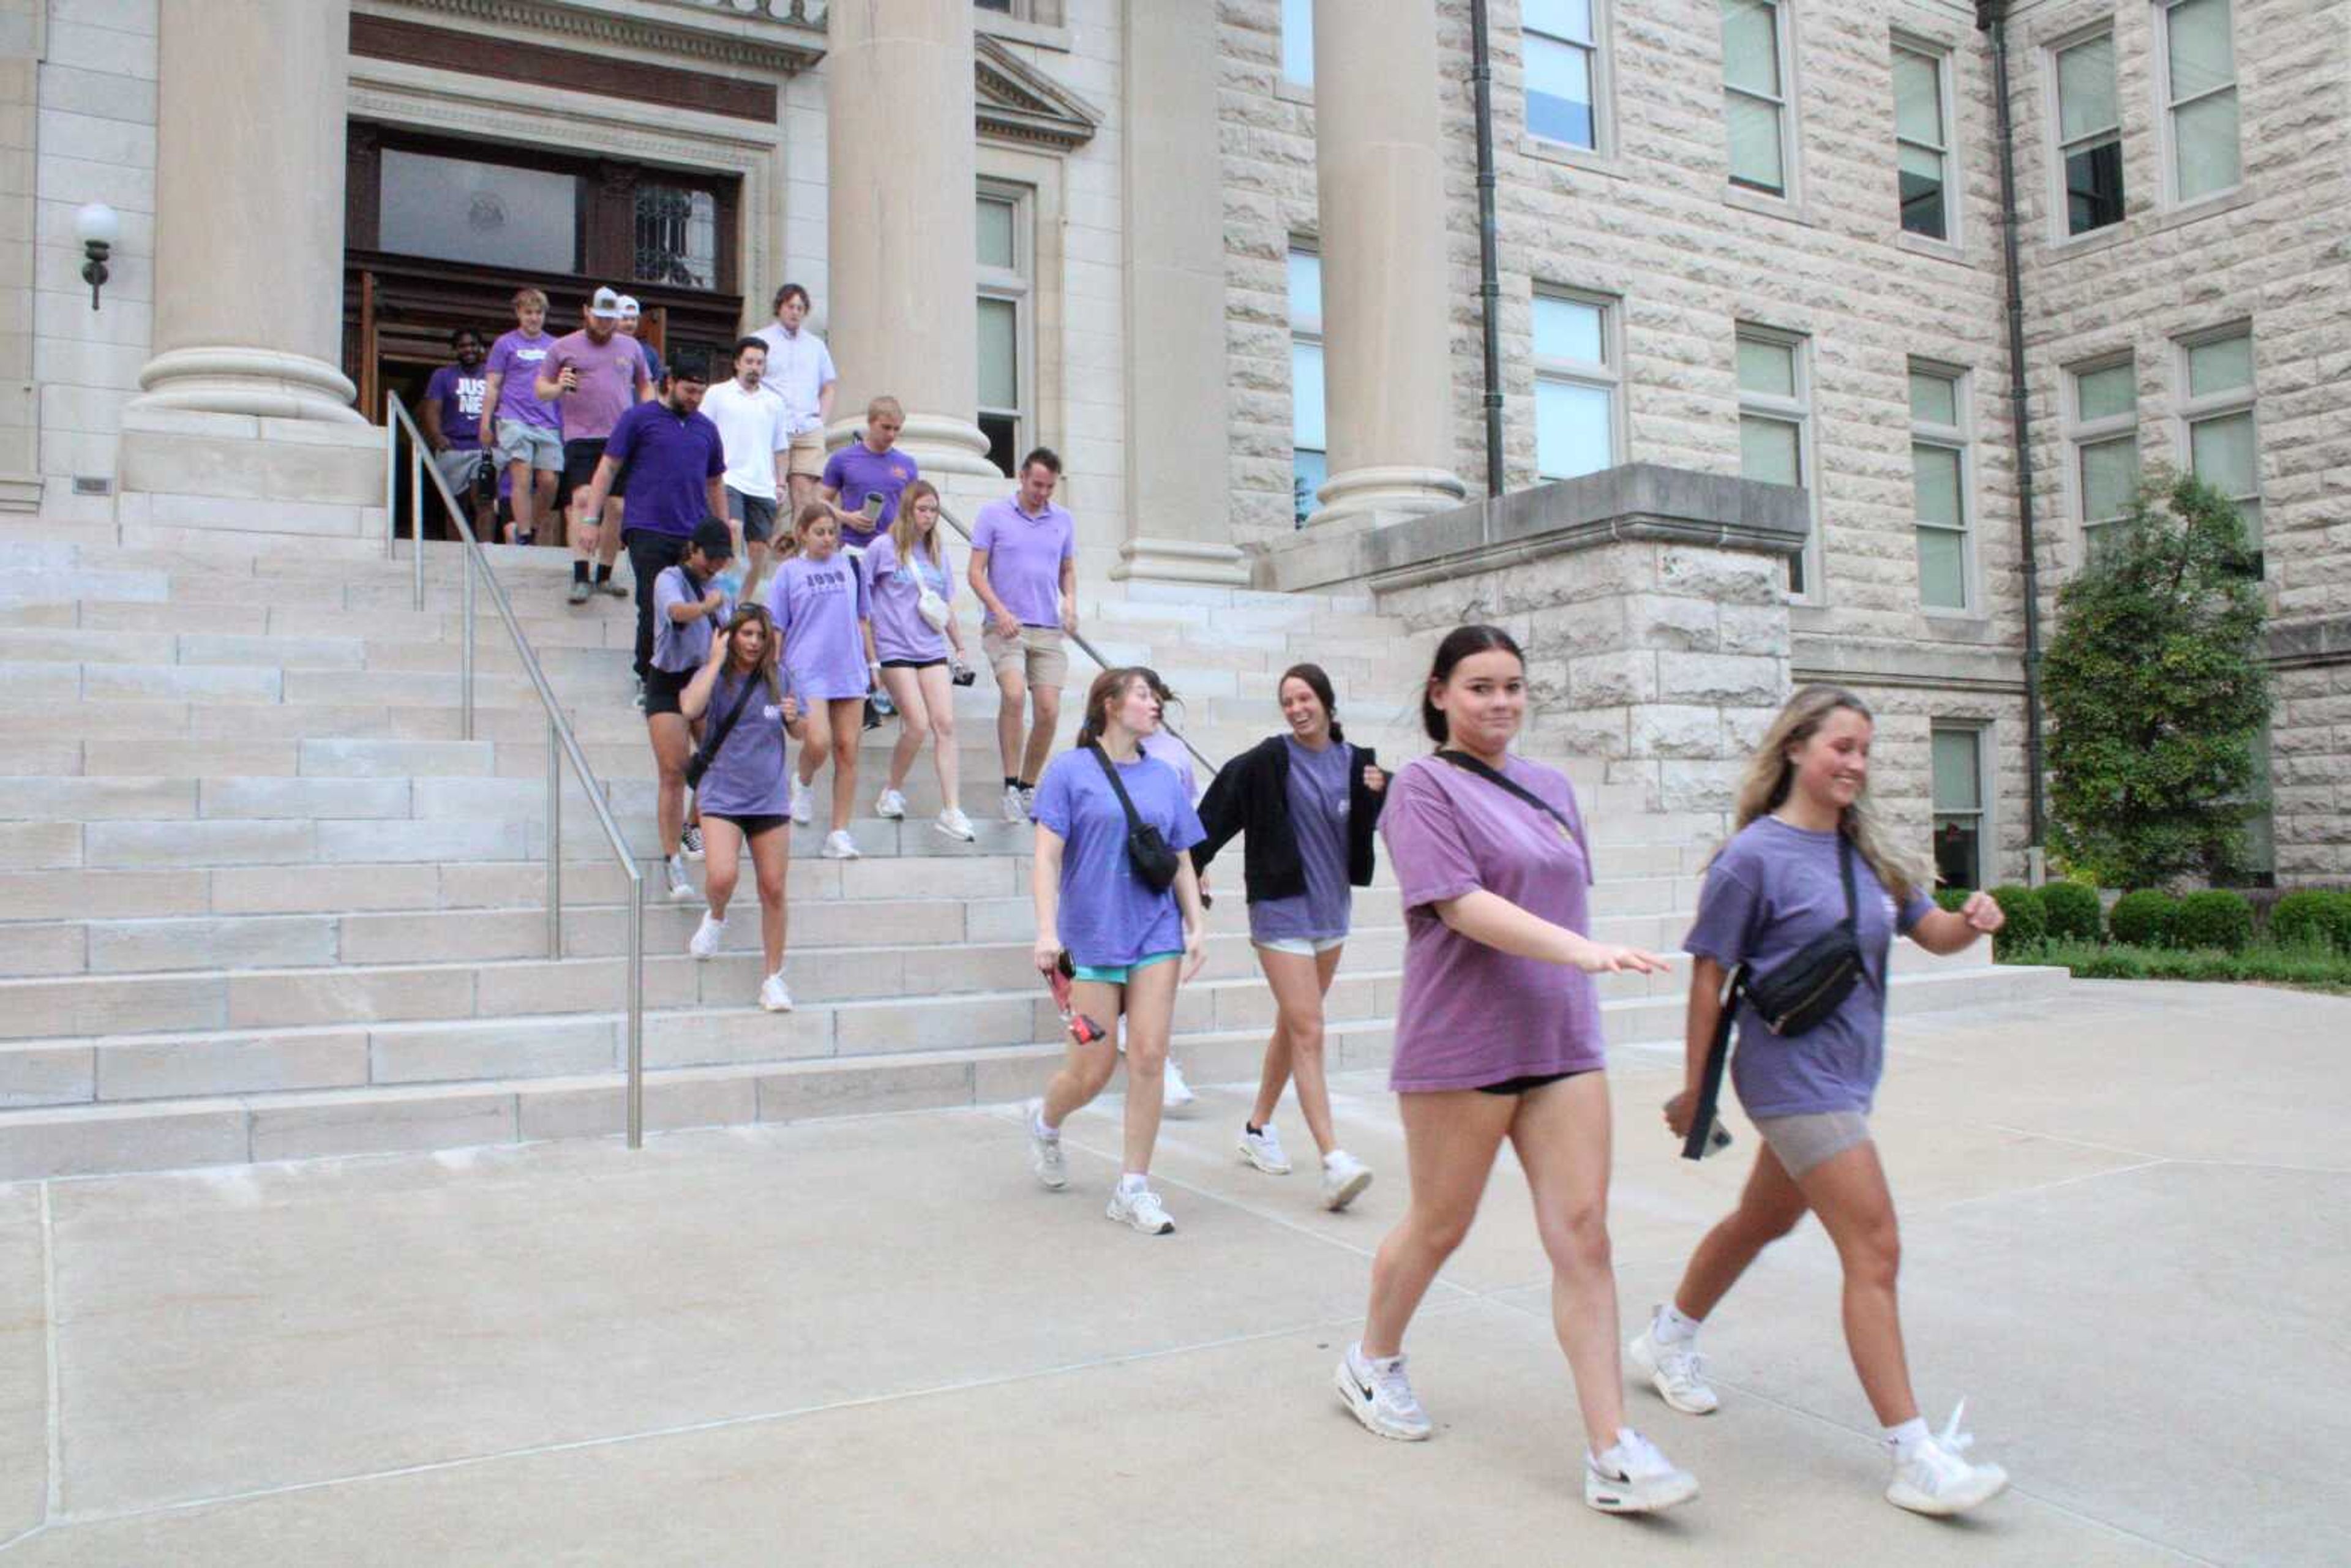 Greek Week Walk a Mile in Her Shoes event raises awareness about sexual violence on campus